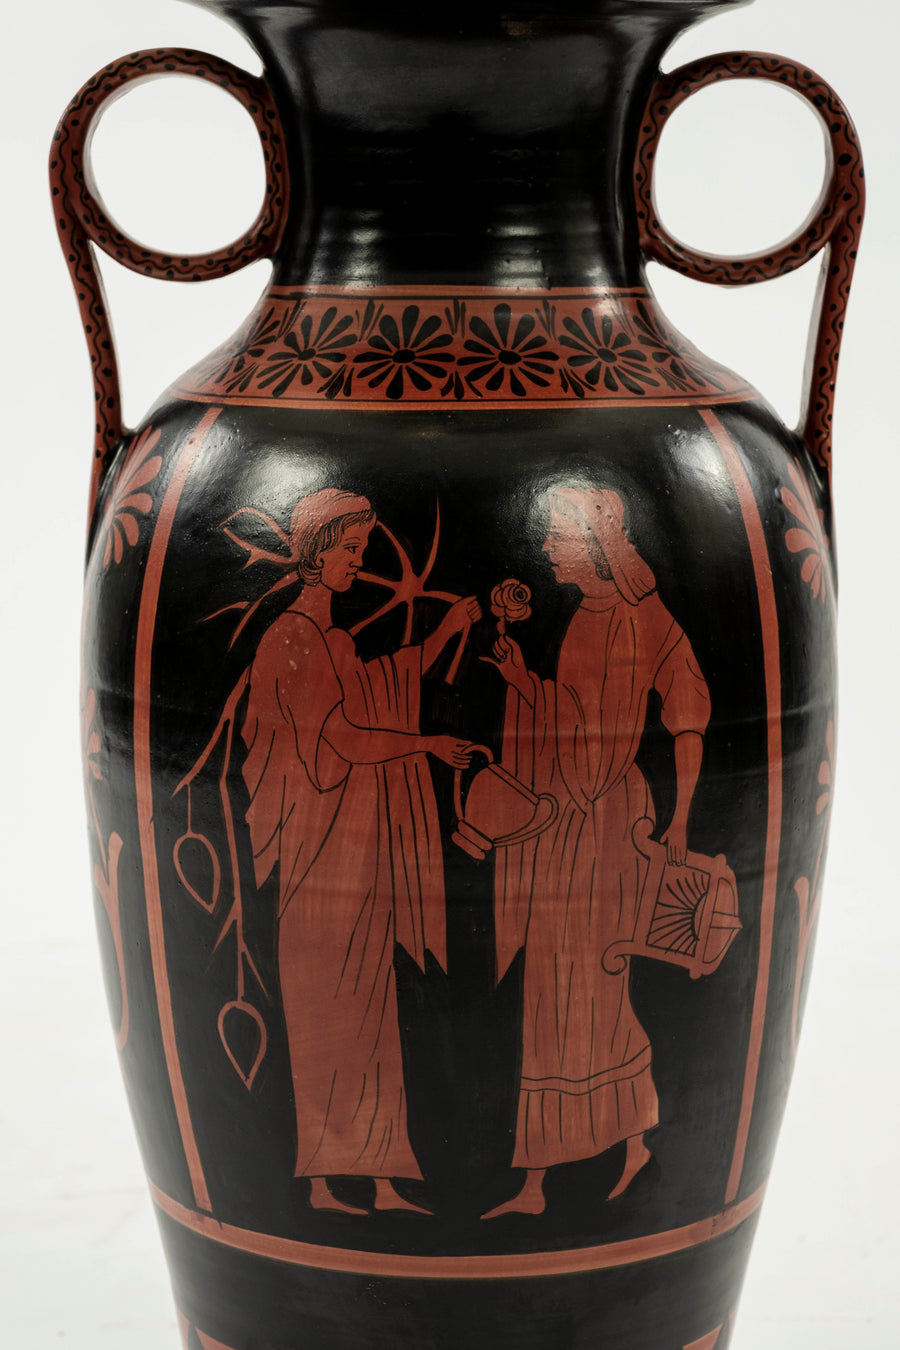 Up-close of the urn lamp's base featuring classic Etruscan artwork of two females conversing while carrying flora and objects from the Etruscan period, painted in classic red on black.